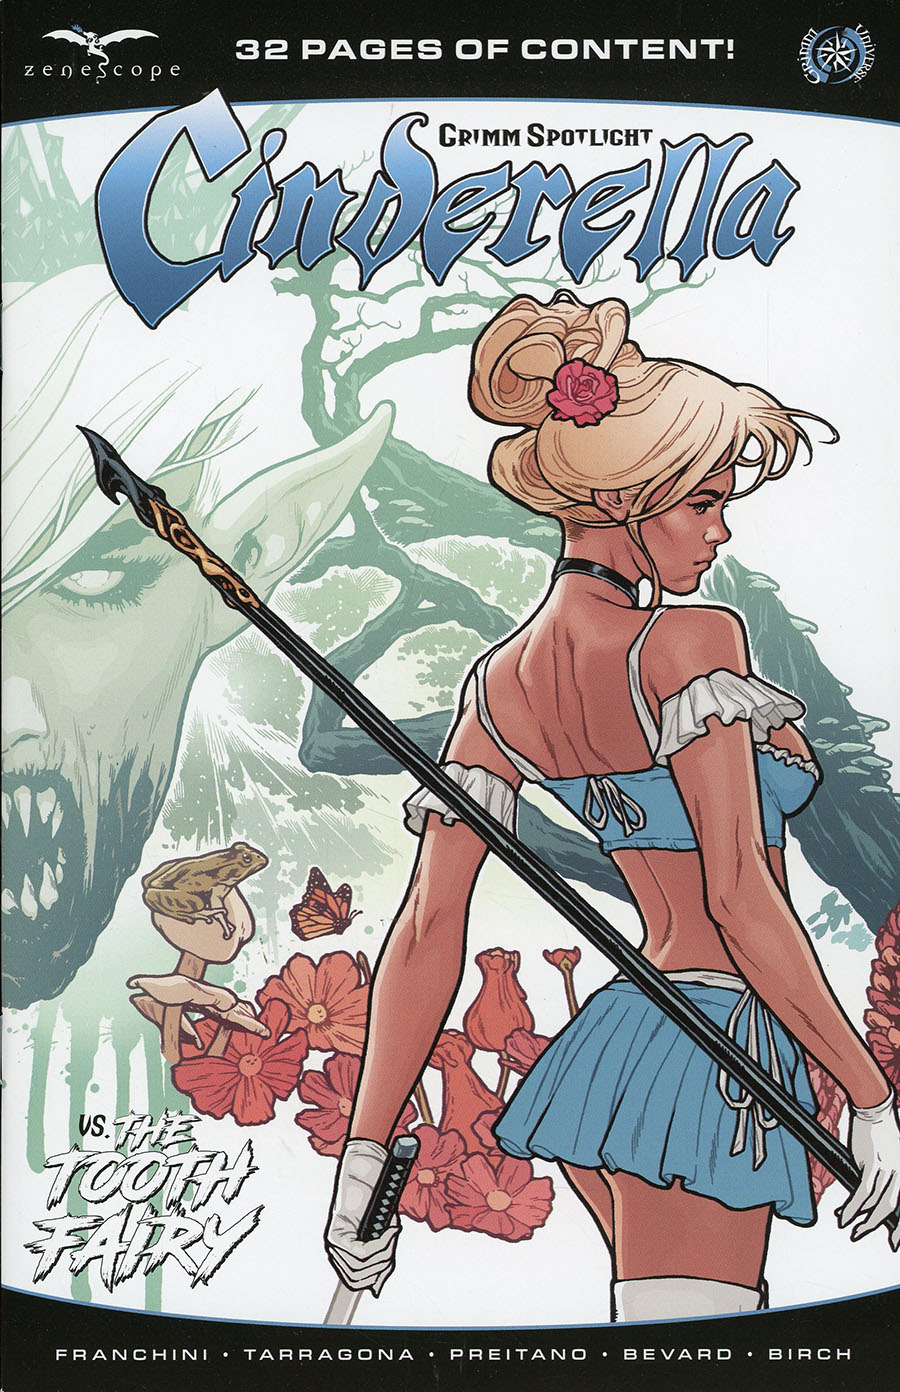 Grimm Spotlight Cinderella vs The Tooth Fairy #1 (One Shot) Cover A Jeff Spokes